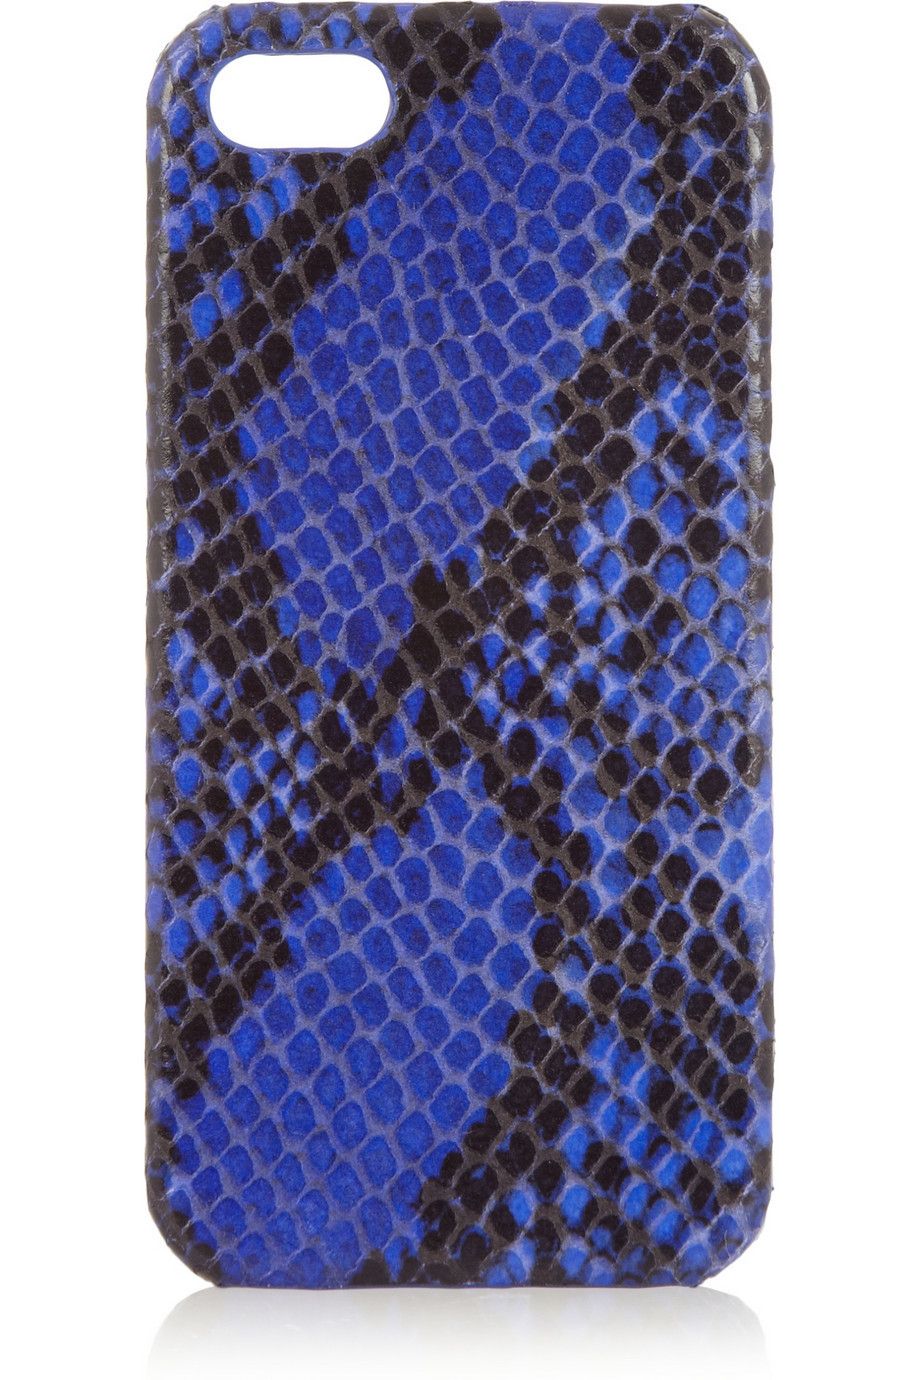 Blue, Pattern, Rectangle, Cobalt blue, Electric blue, Mobile phone case, Mobile phone accessories, Plastic, Skateboard, Musical instrument accessory, 